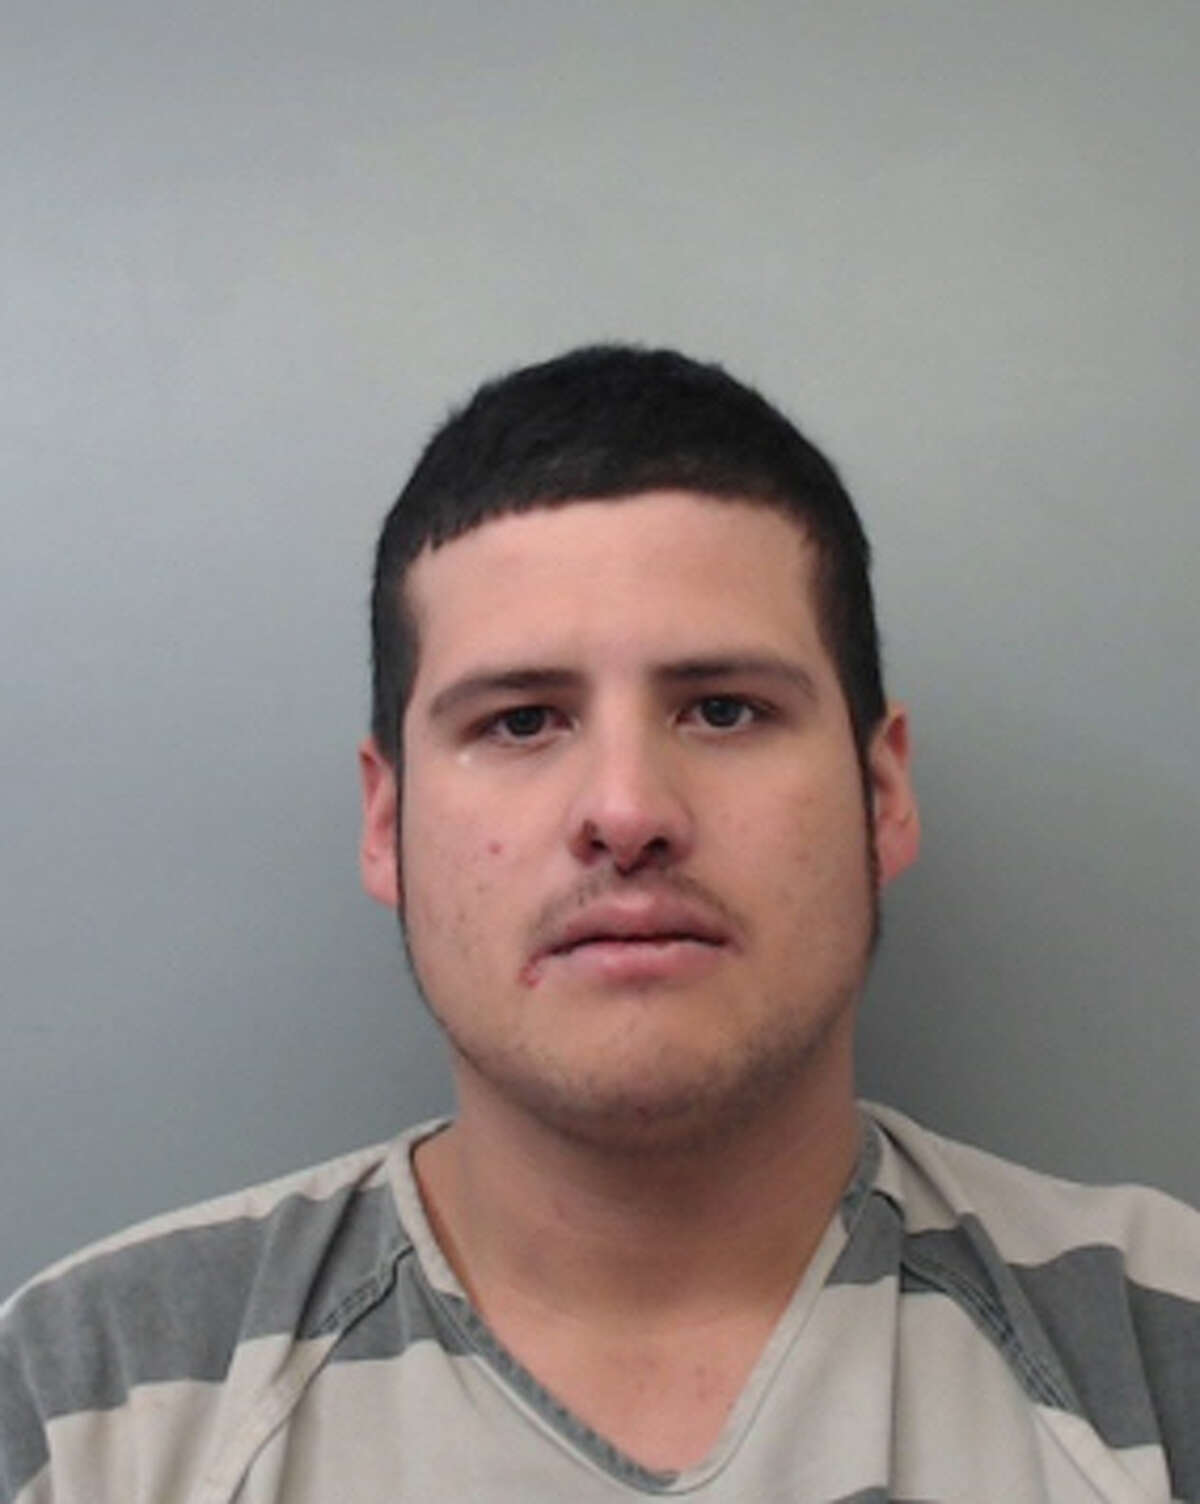 Tomas Rojas Jr., 26, was charged with burglary of habitation, theft of a firearm, aggravated robbery with a firearm and impersonating a public servant.